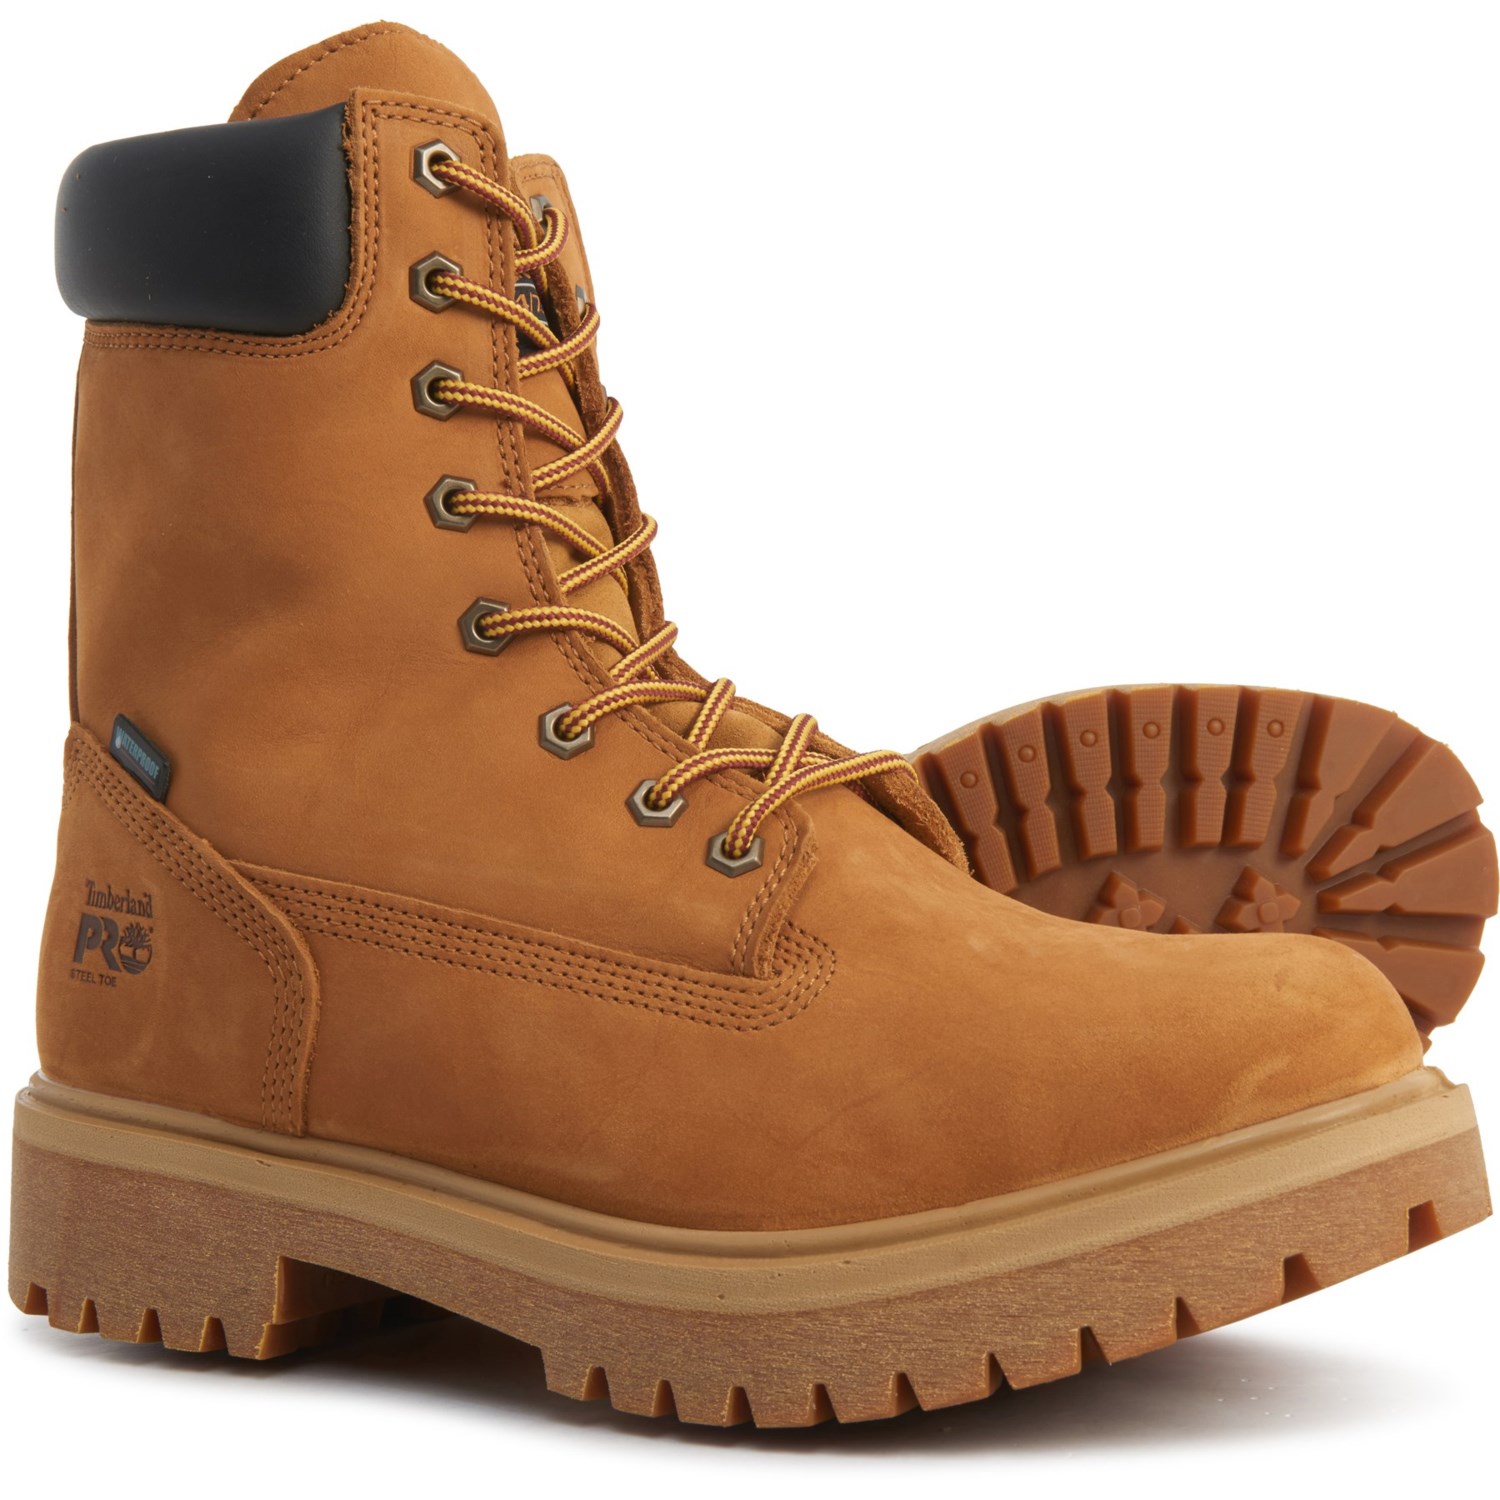 timberland pro direct attach steel safety toe waterproof insulated boot